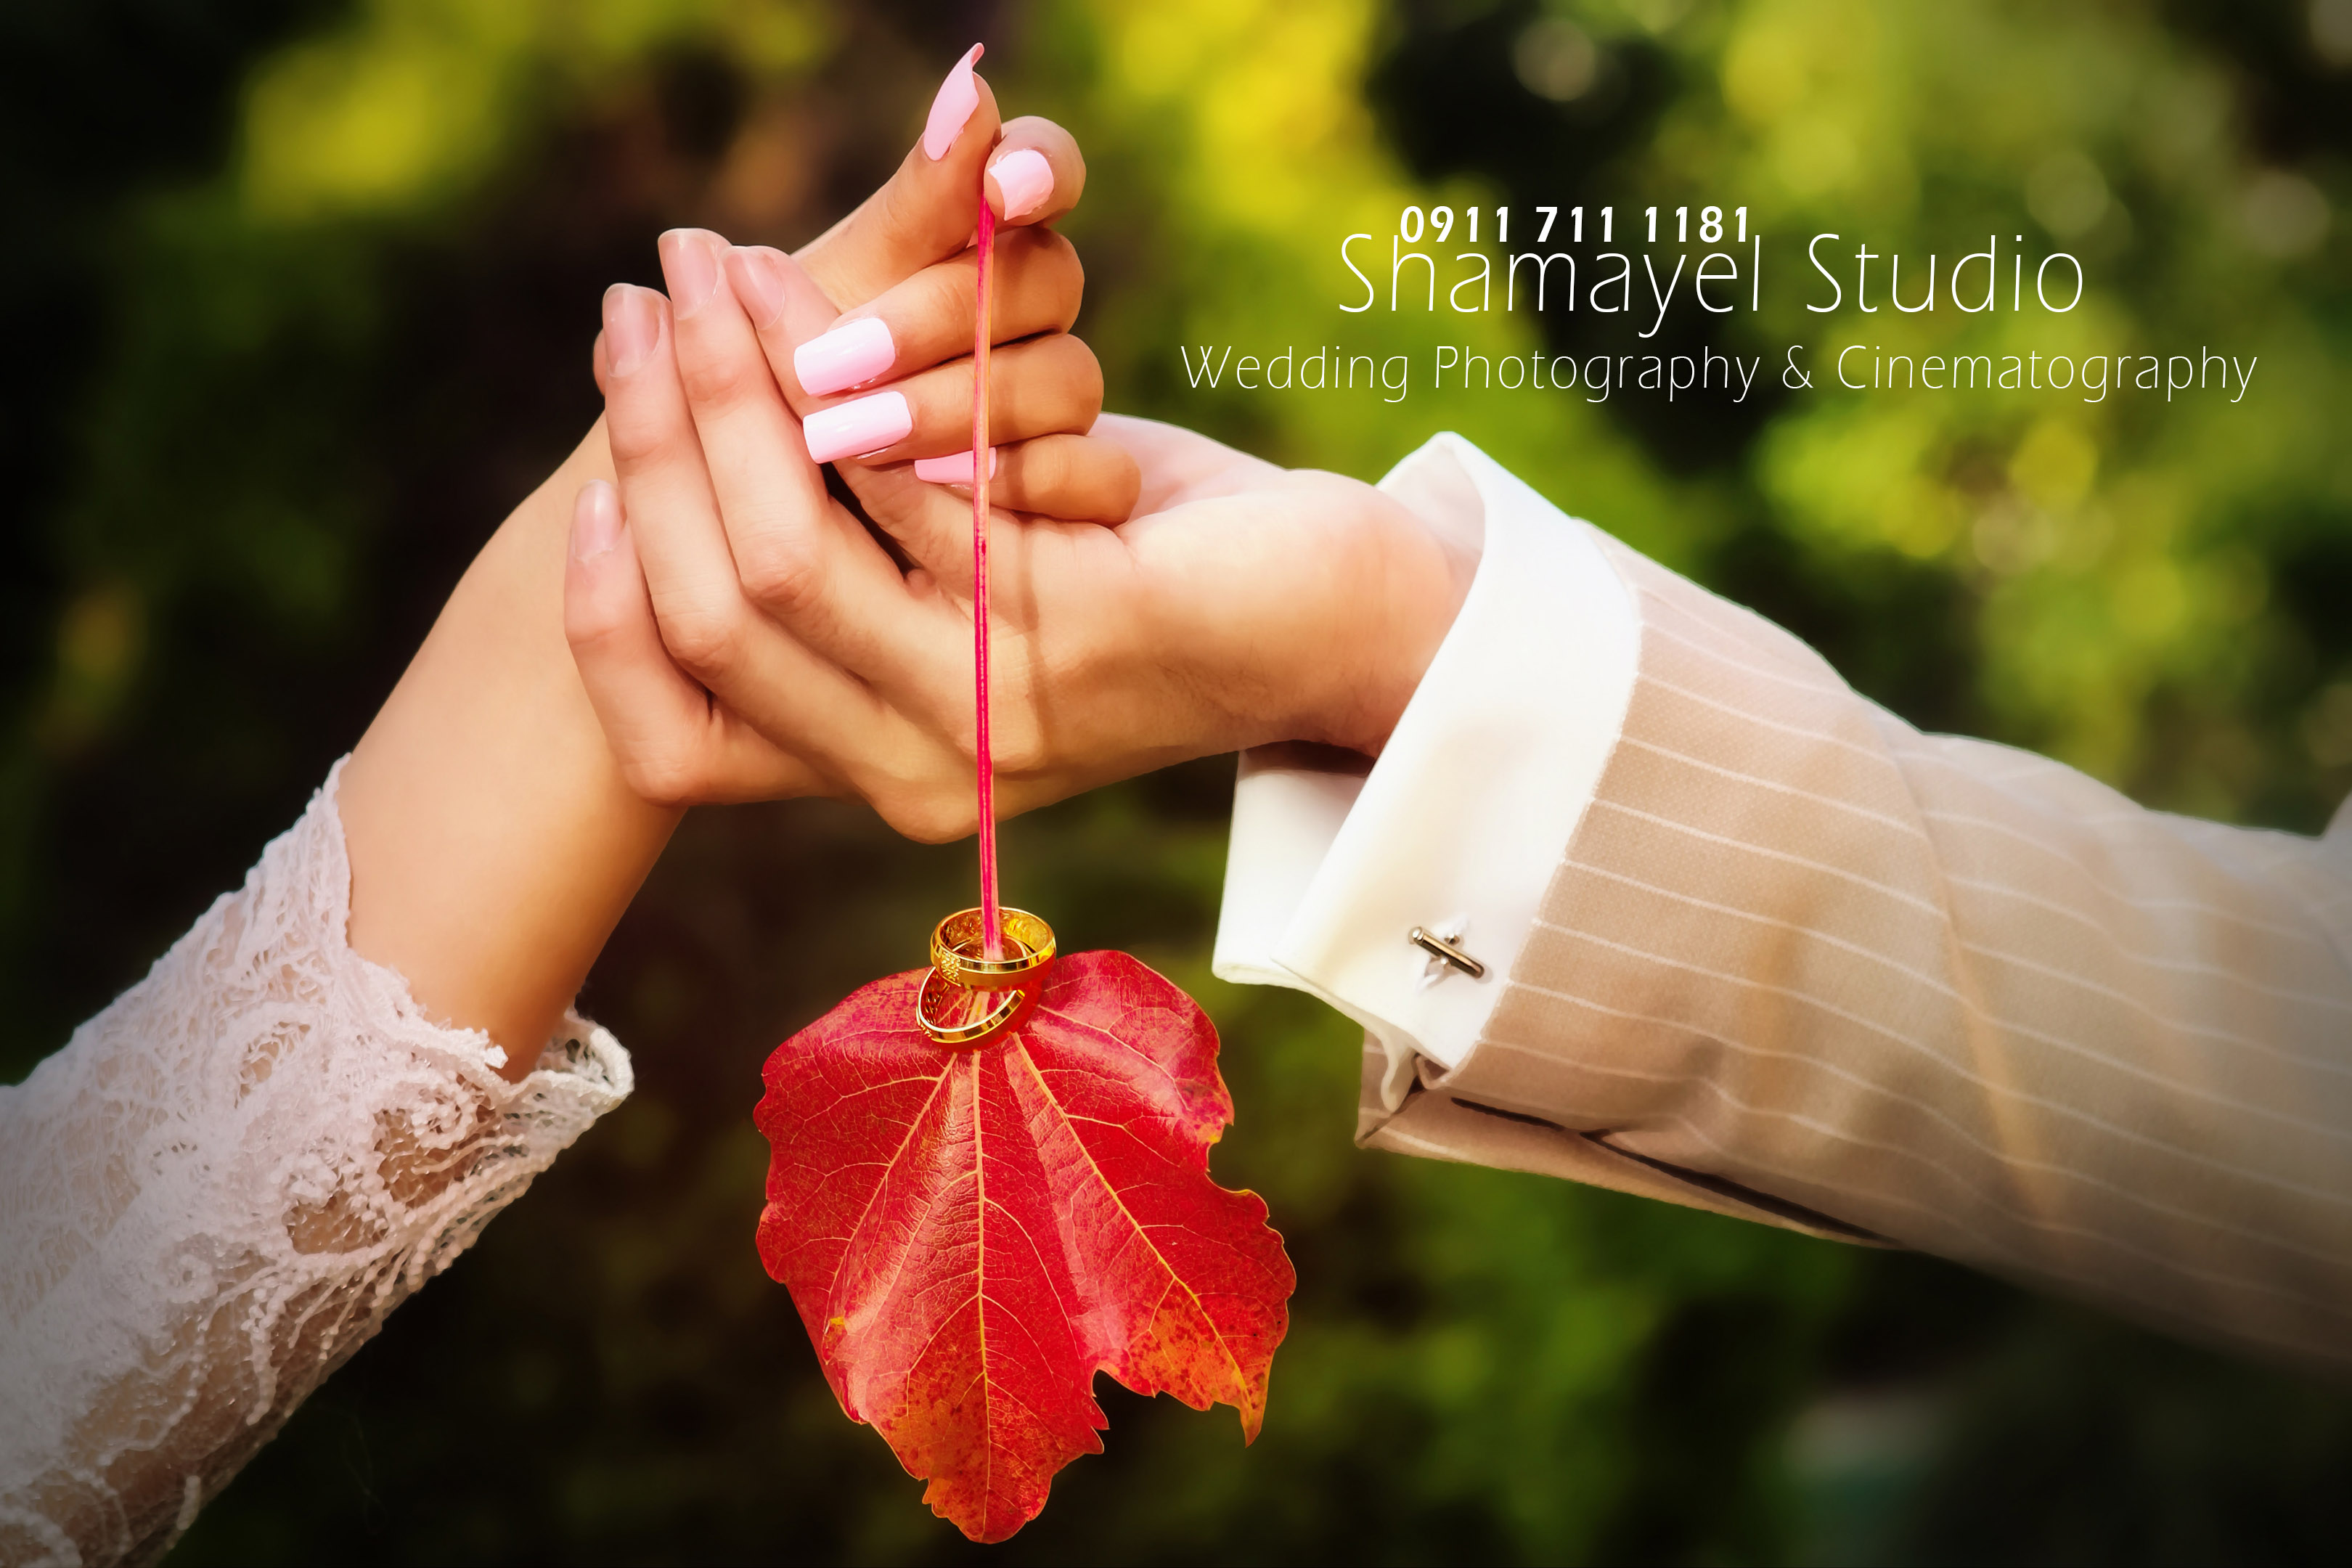 Bridal rings and autumn leaves